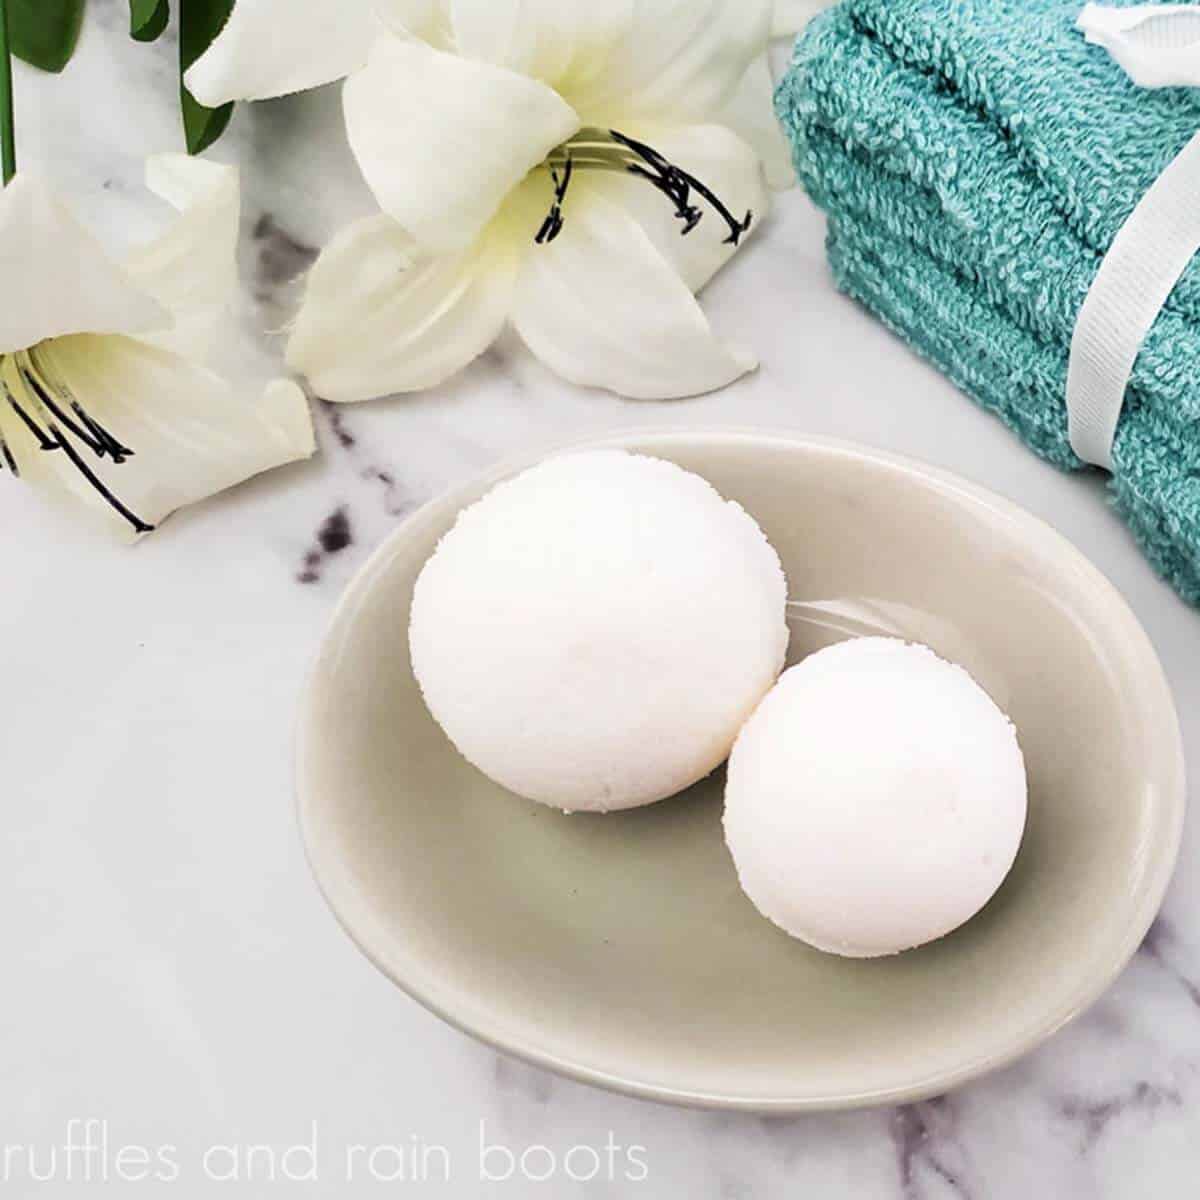 Square image close up of 2 sizes of homemade milk bath bombs on a soap dish with a vanilla blossom and teal washcloths all on a marble counter top. 